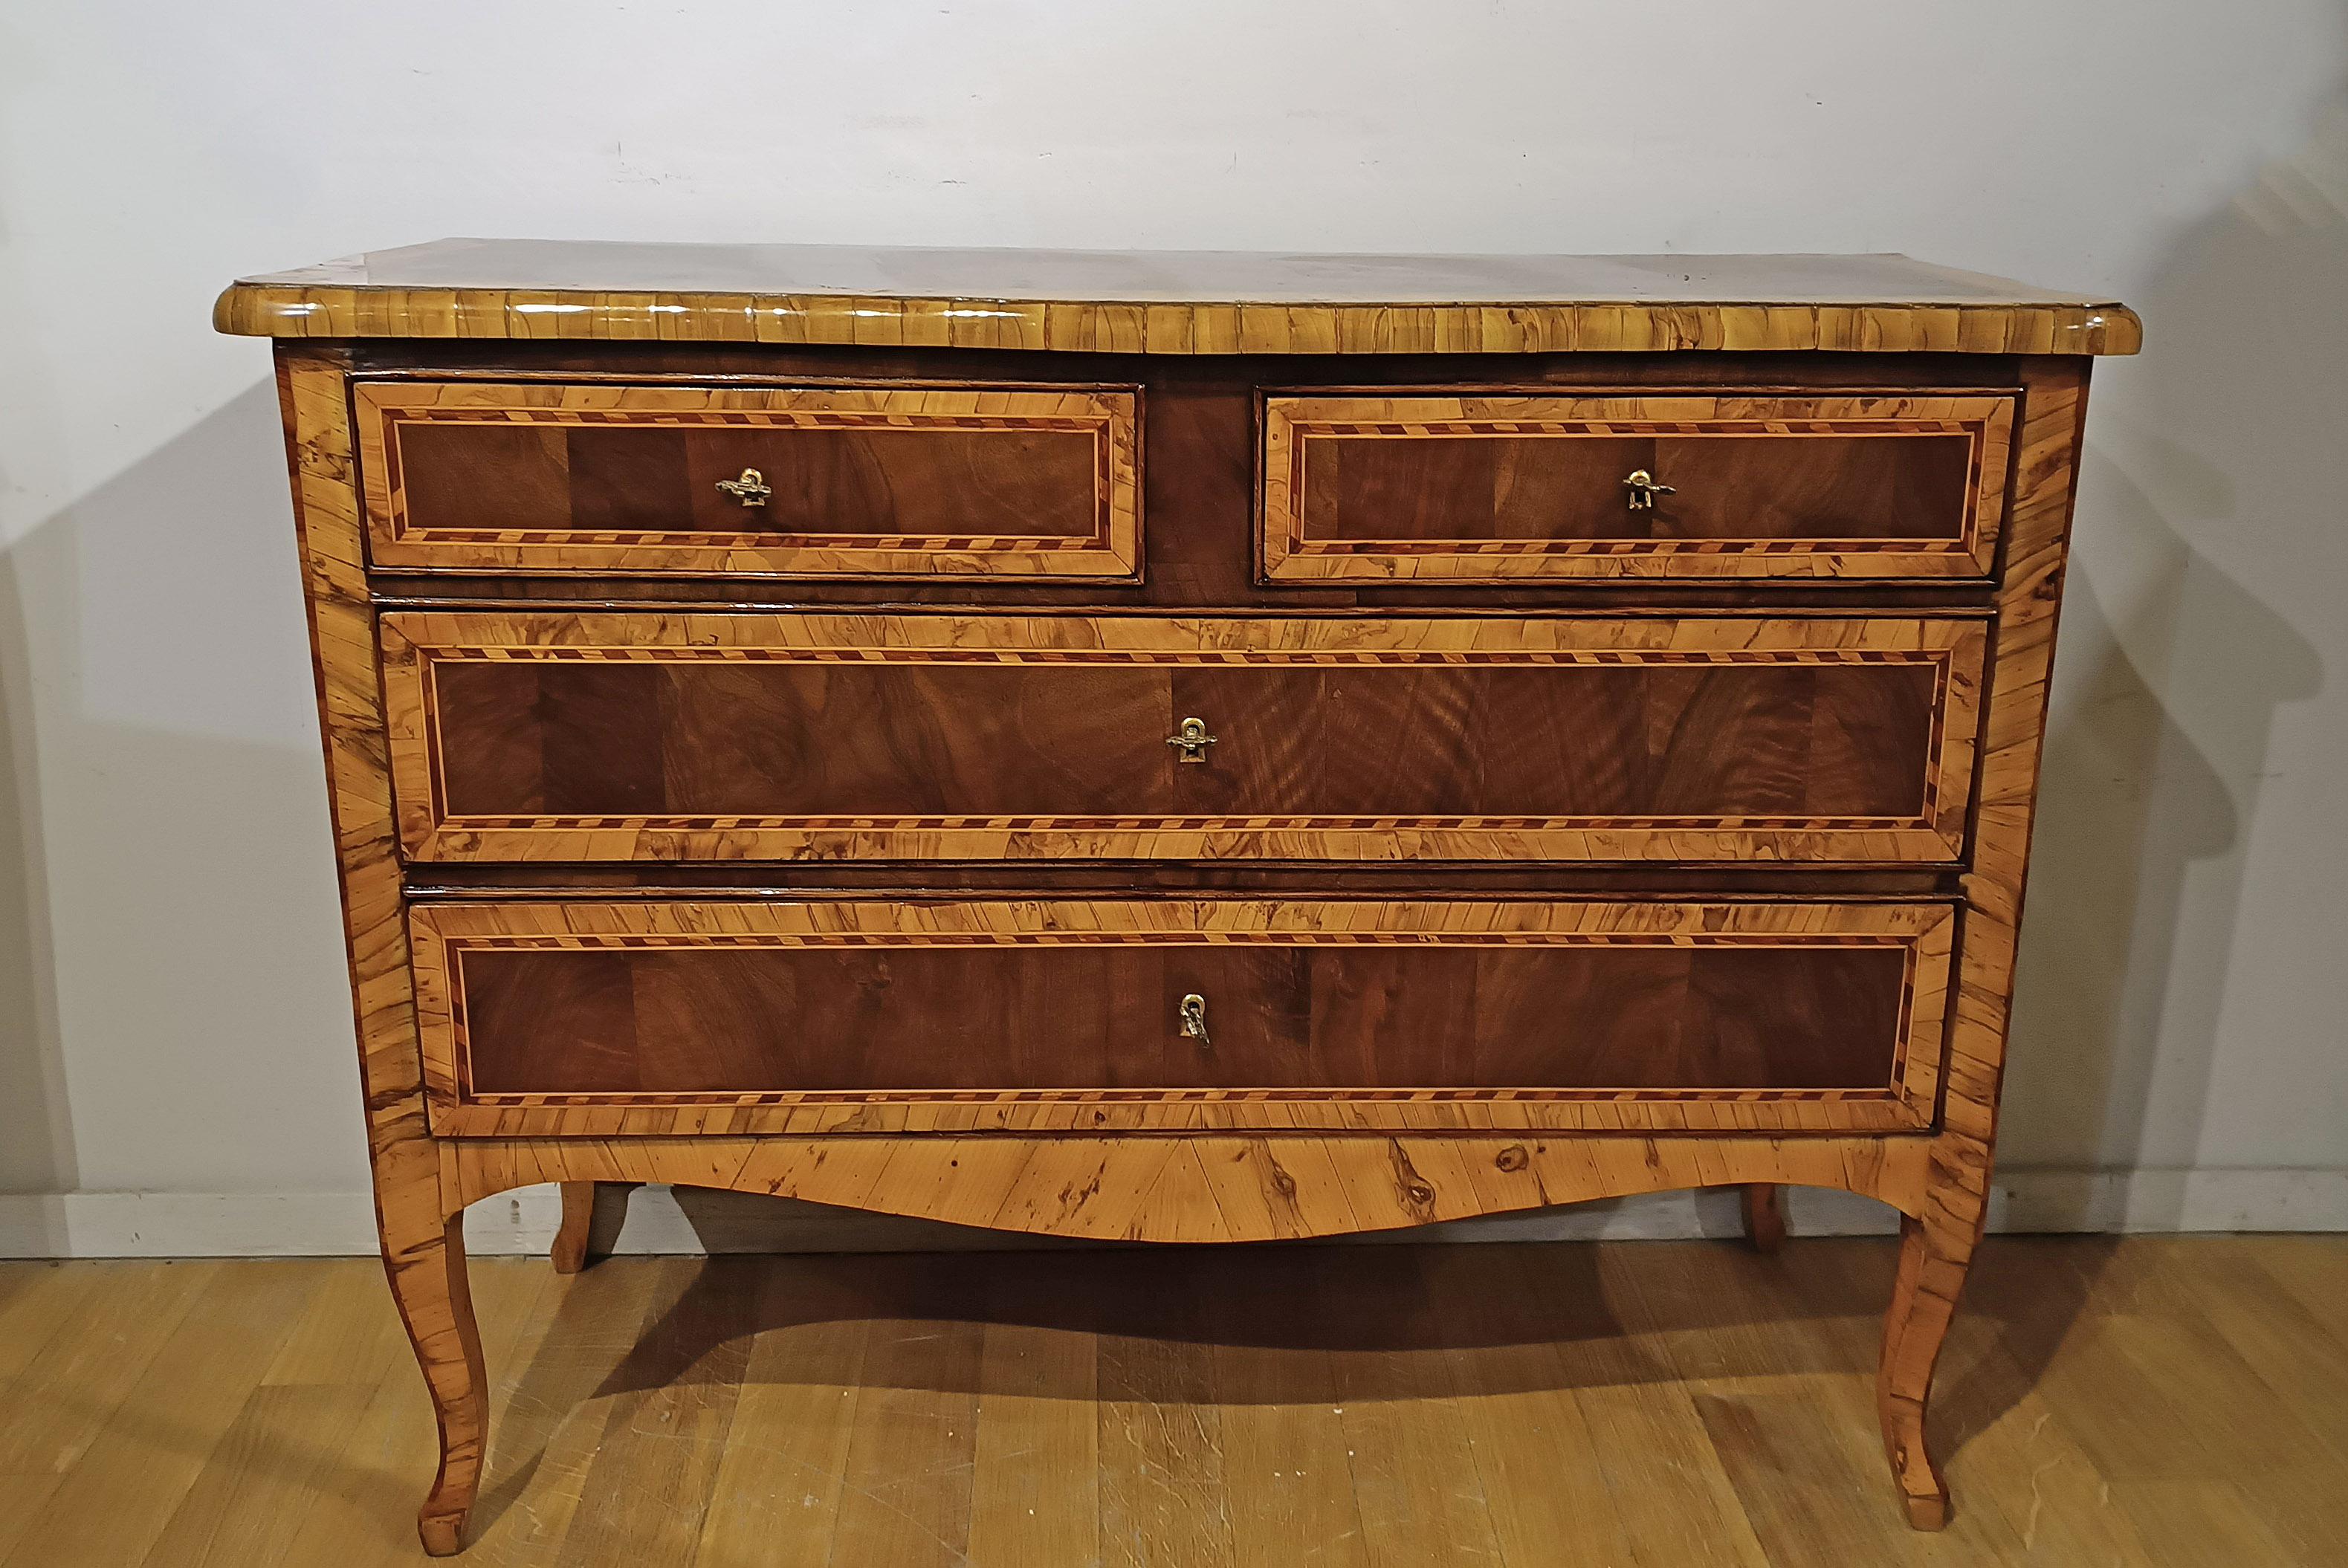 This Louis XV chest of drawers, completely veneered in walnut and olive wood, is a remarkably elegant and refined piece of furniture. Its distinctive feature is the thick strip present, which denotes great quality and attention to detail in the